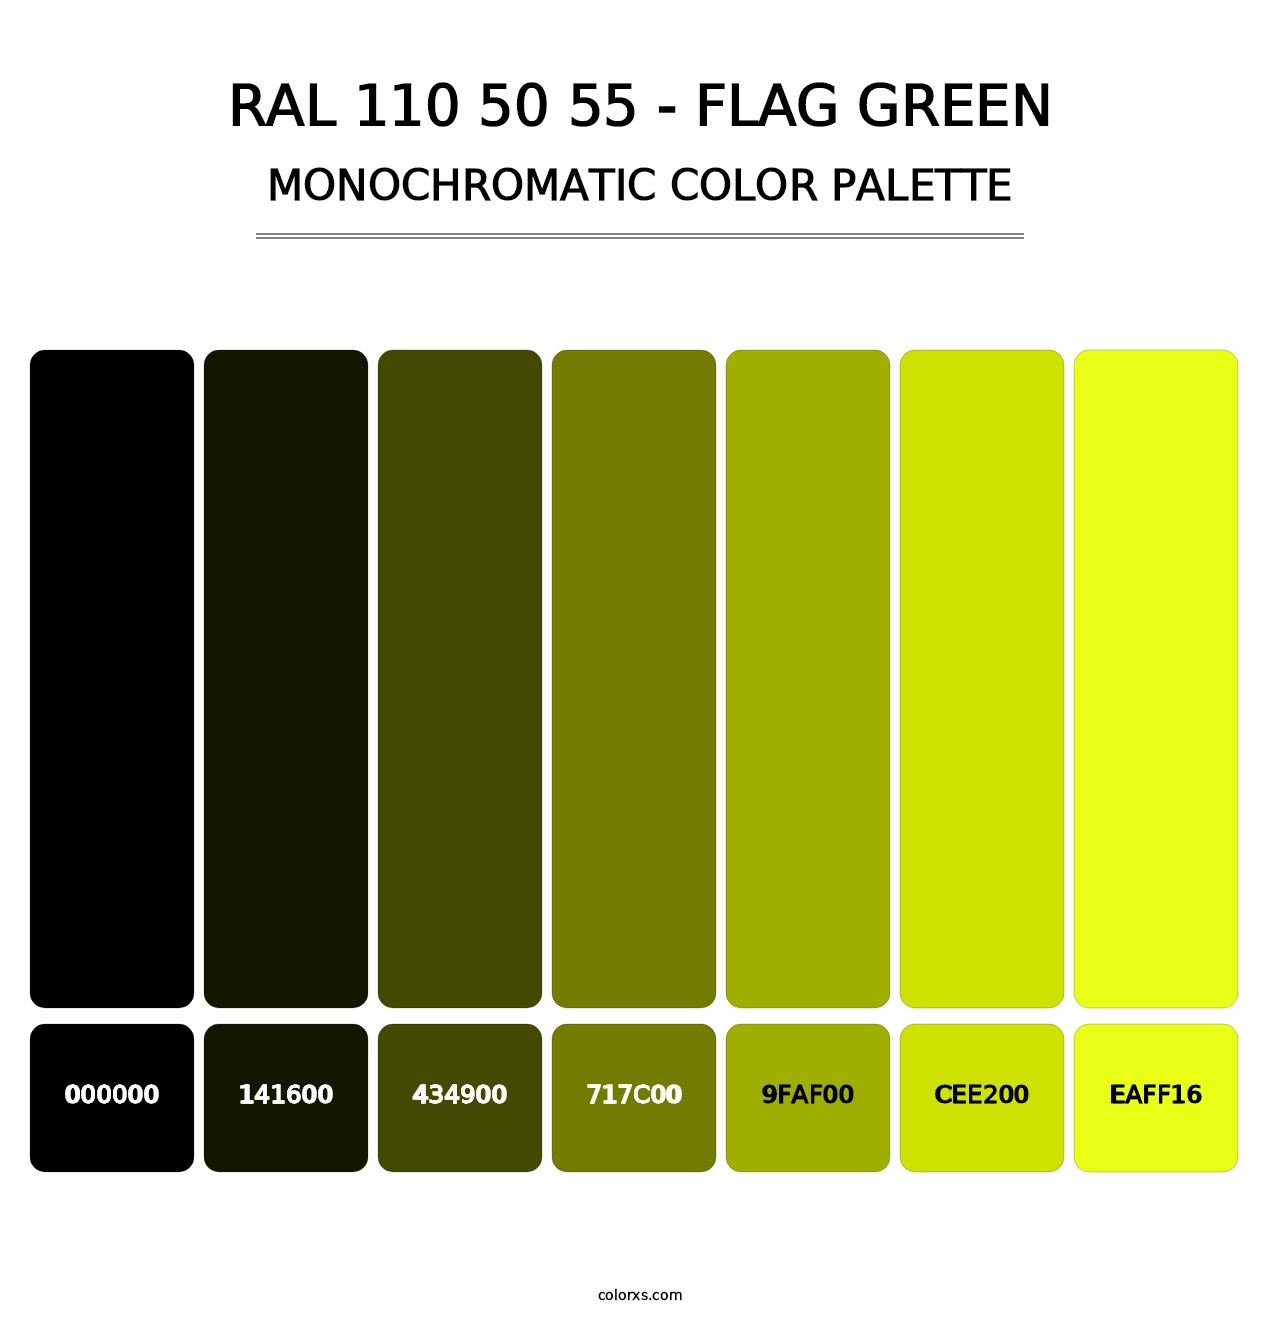 RAL 110 50 55 - Flag Green - Monochromatic Color Palette